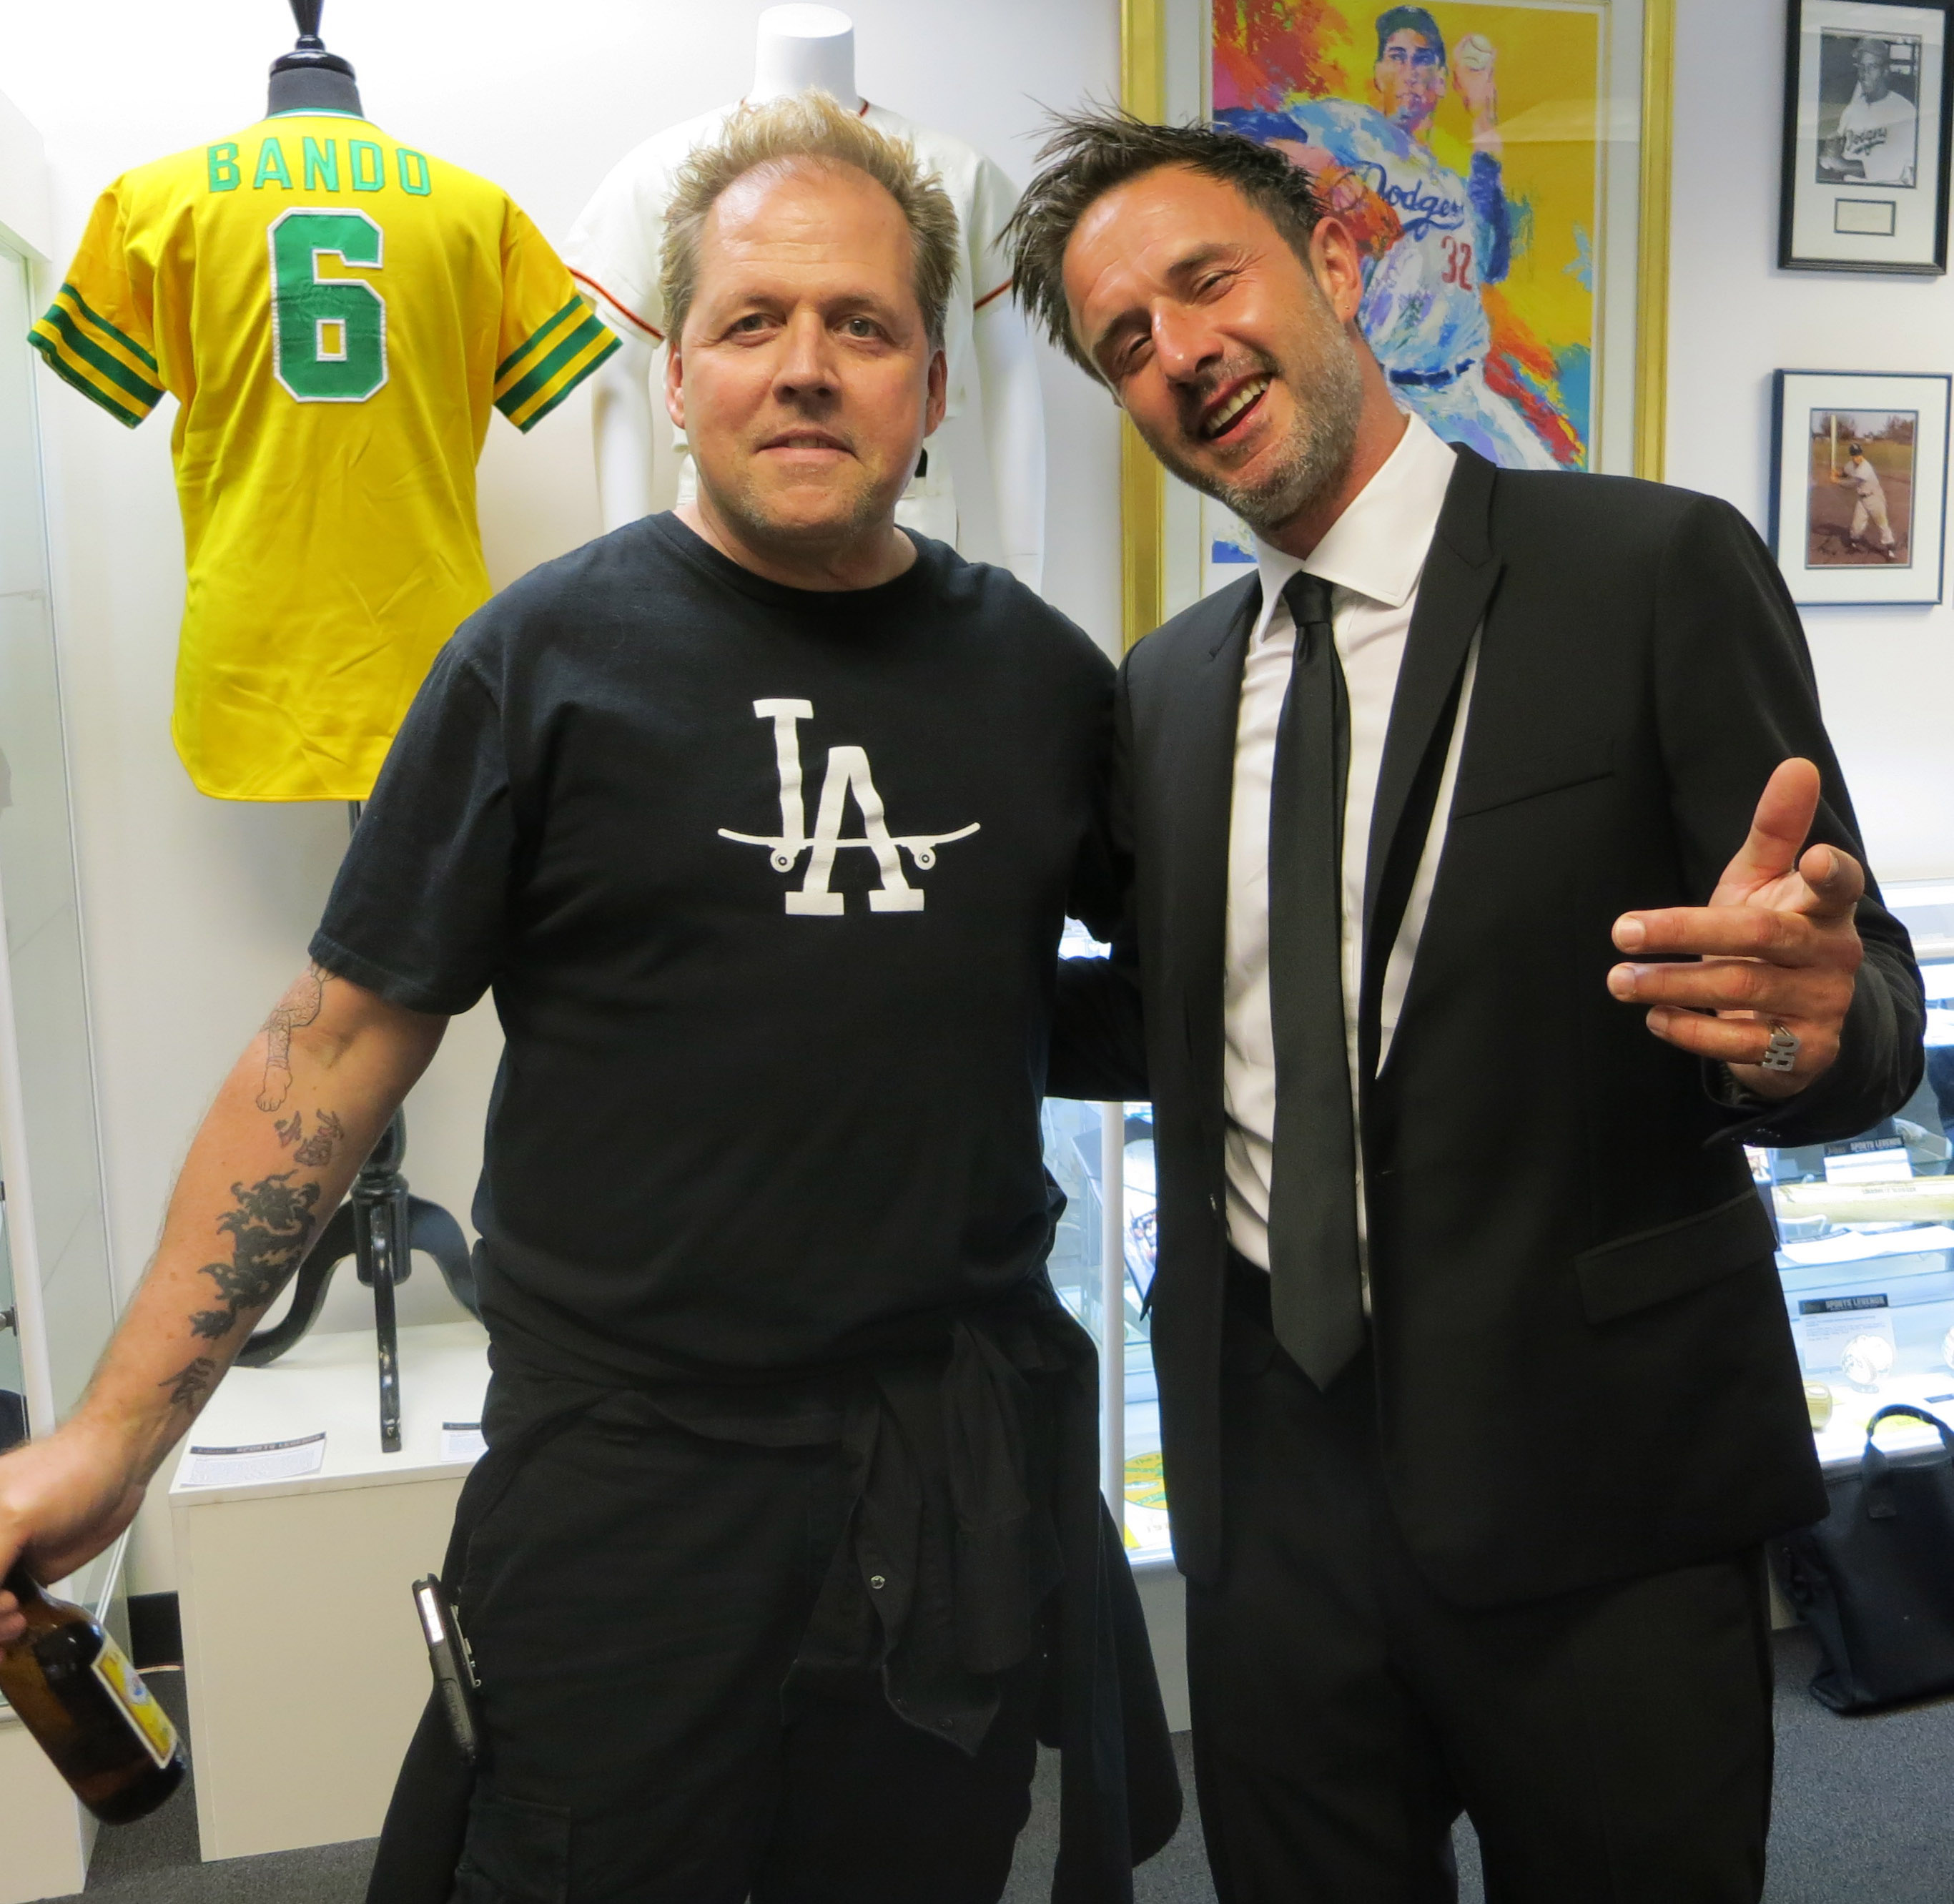 David Arquette (actor)and Mark Rooney (musician/composer)